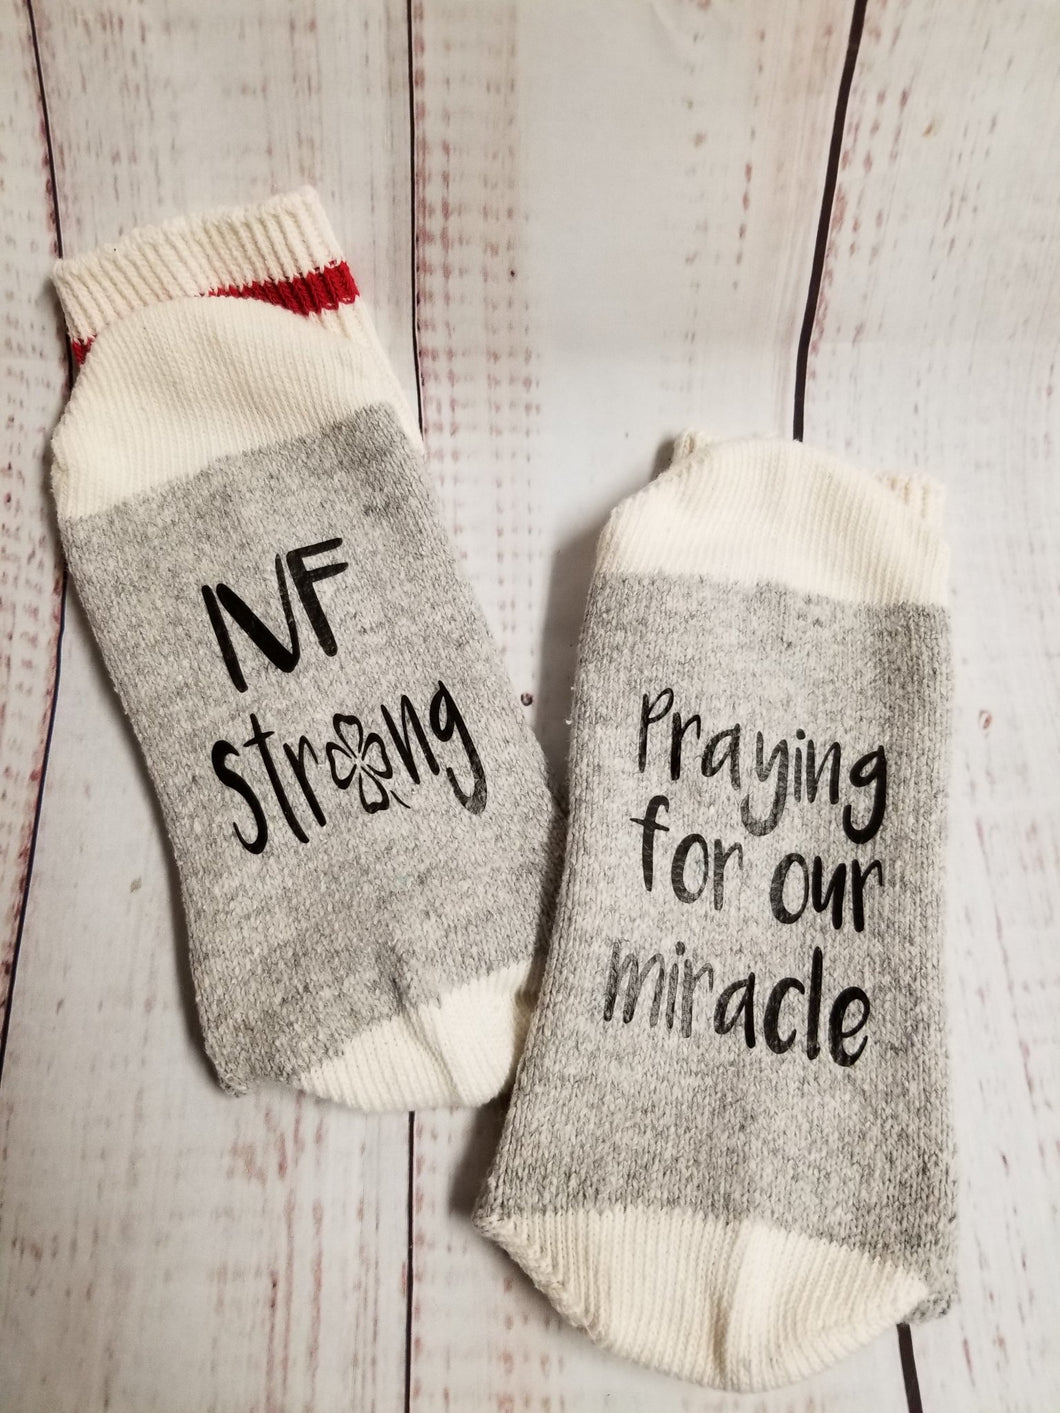 IVF Strong socks, Praying for our miracle, lucky socks - My Other Child / Blooms n' Rooms